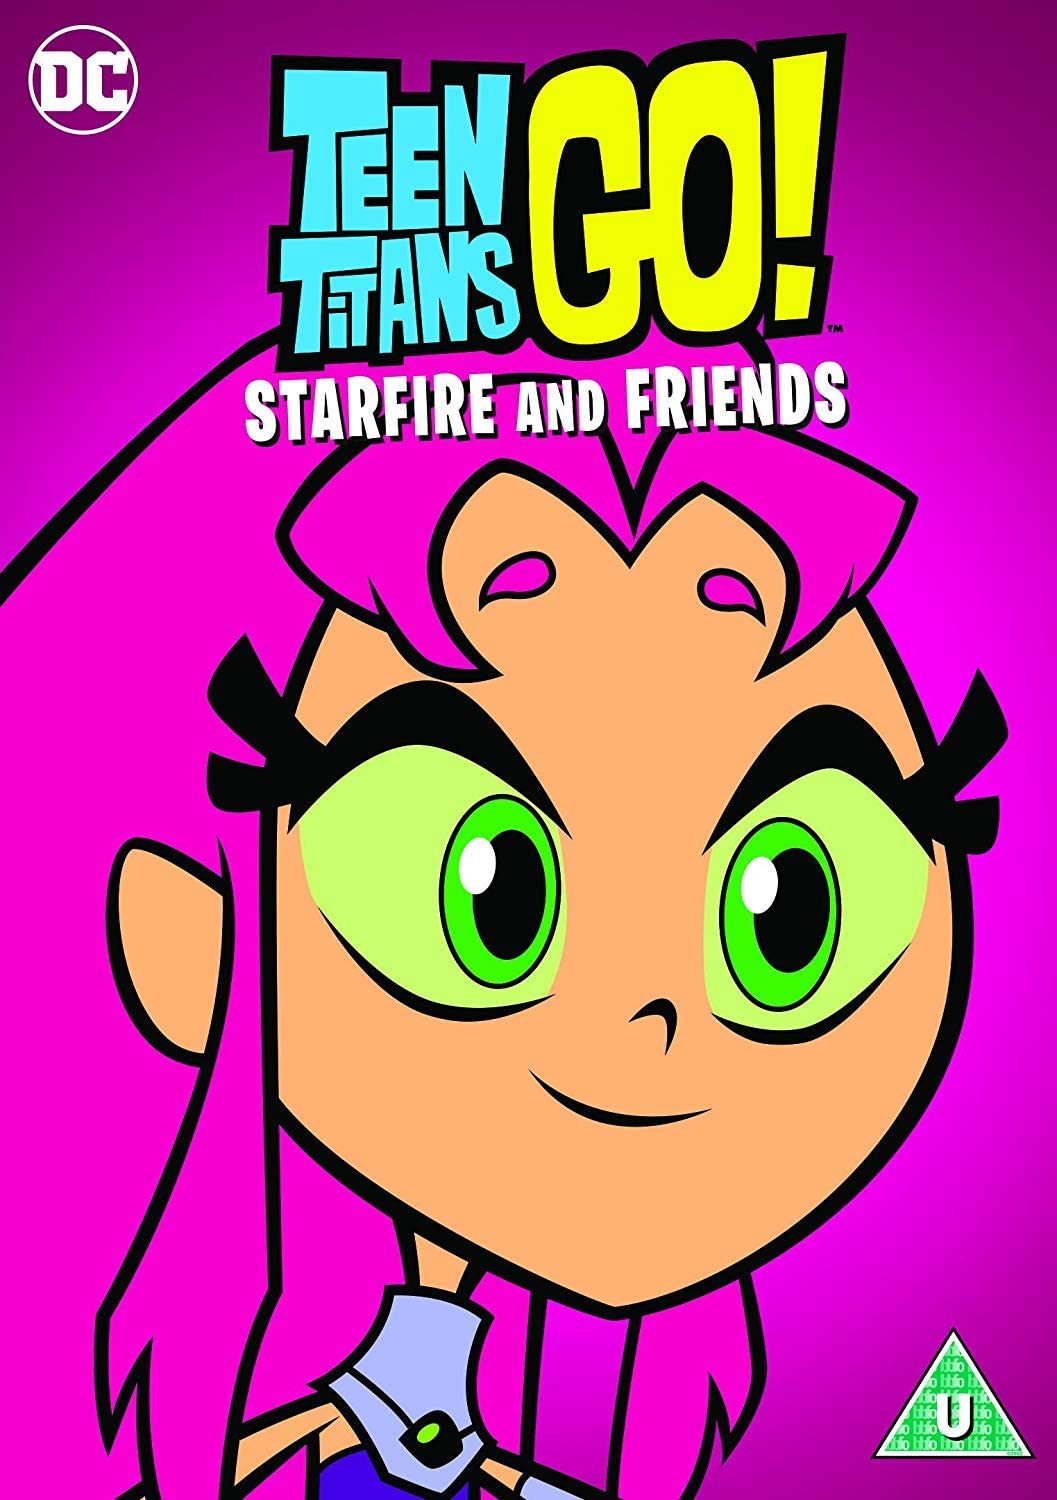 Teen Titans Go! Starfire and Friends - Animation [DVD]